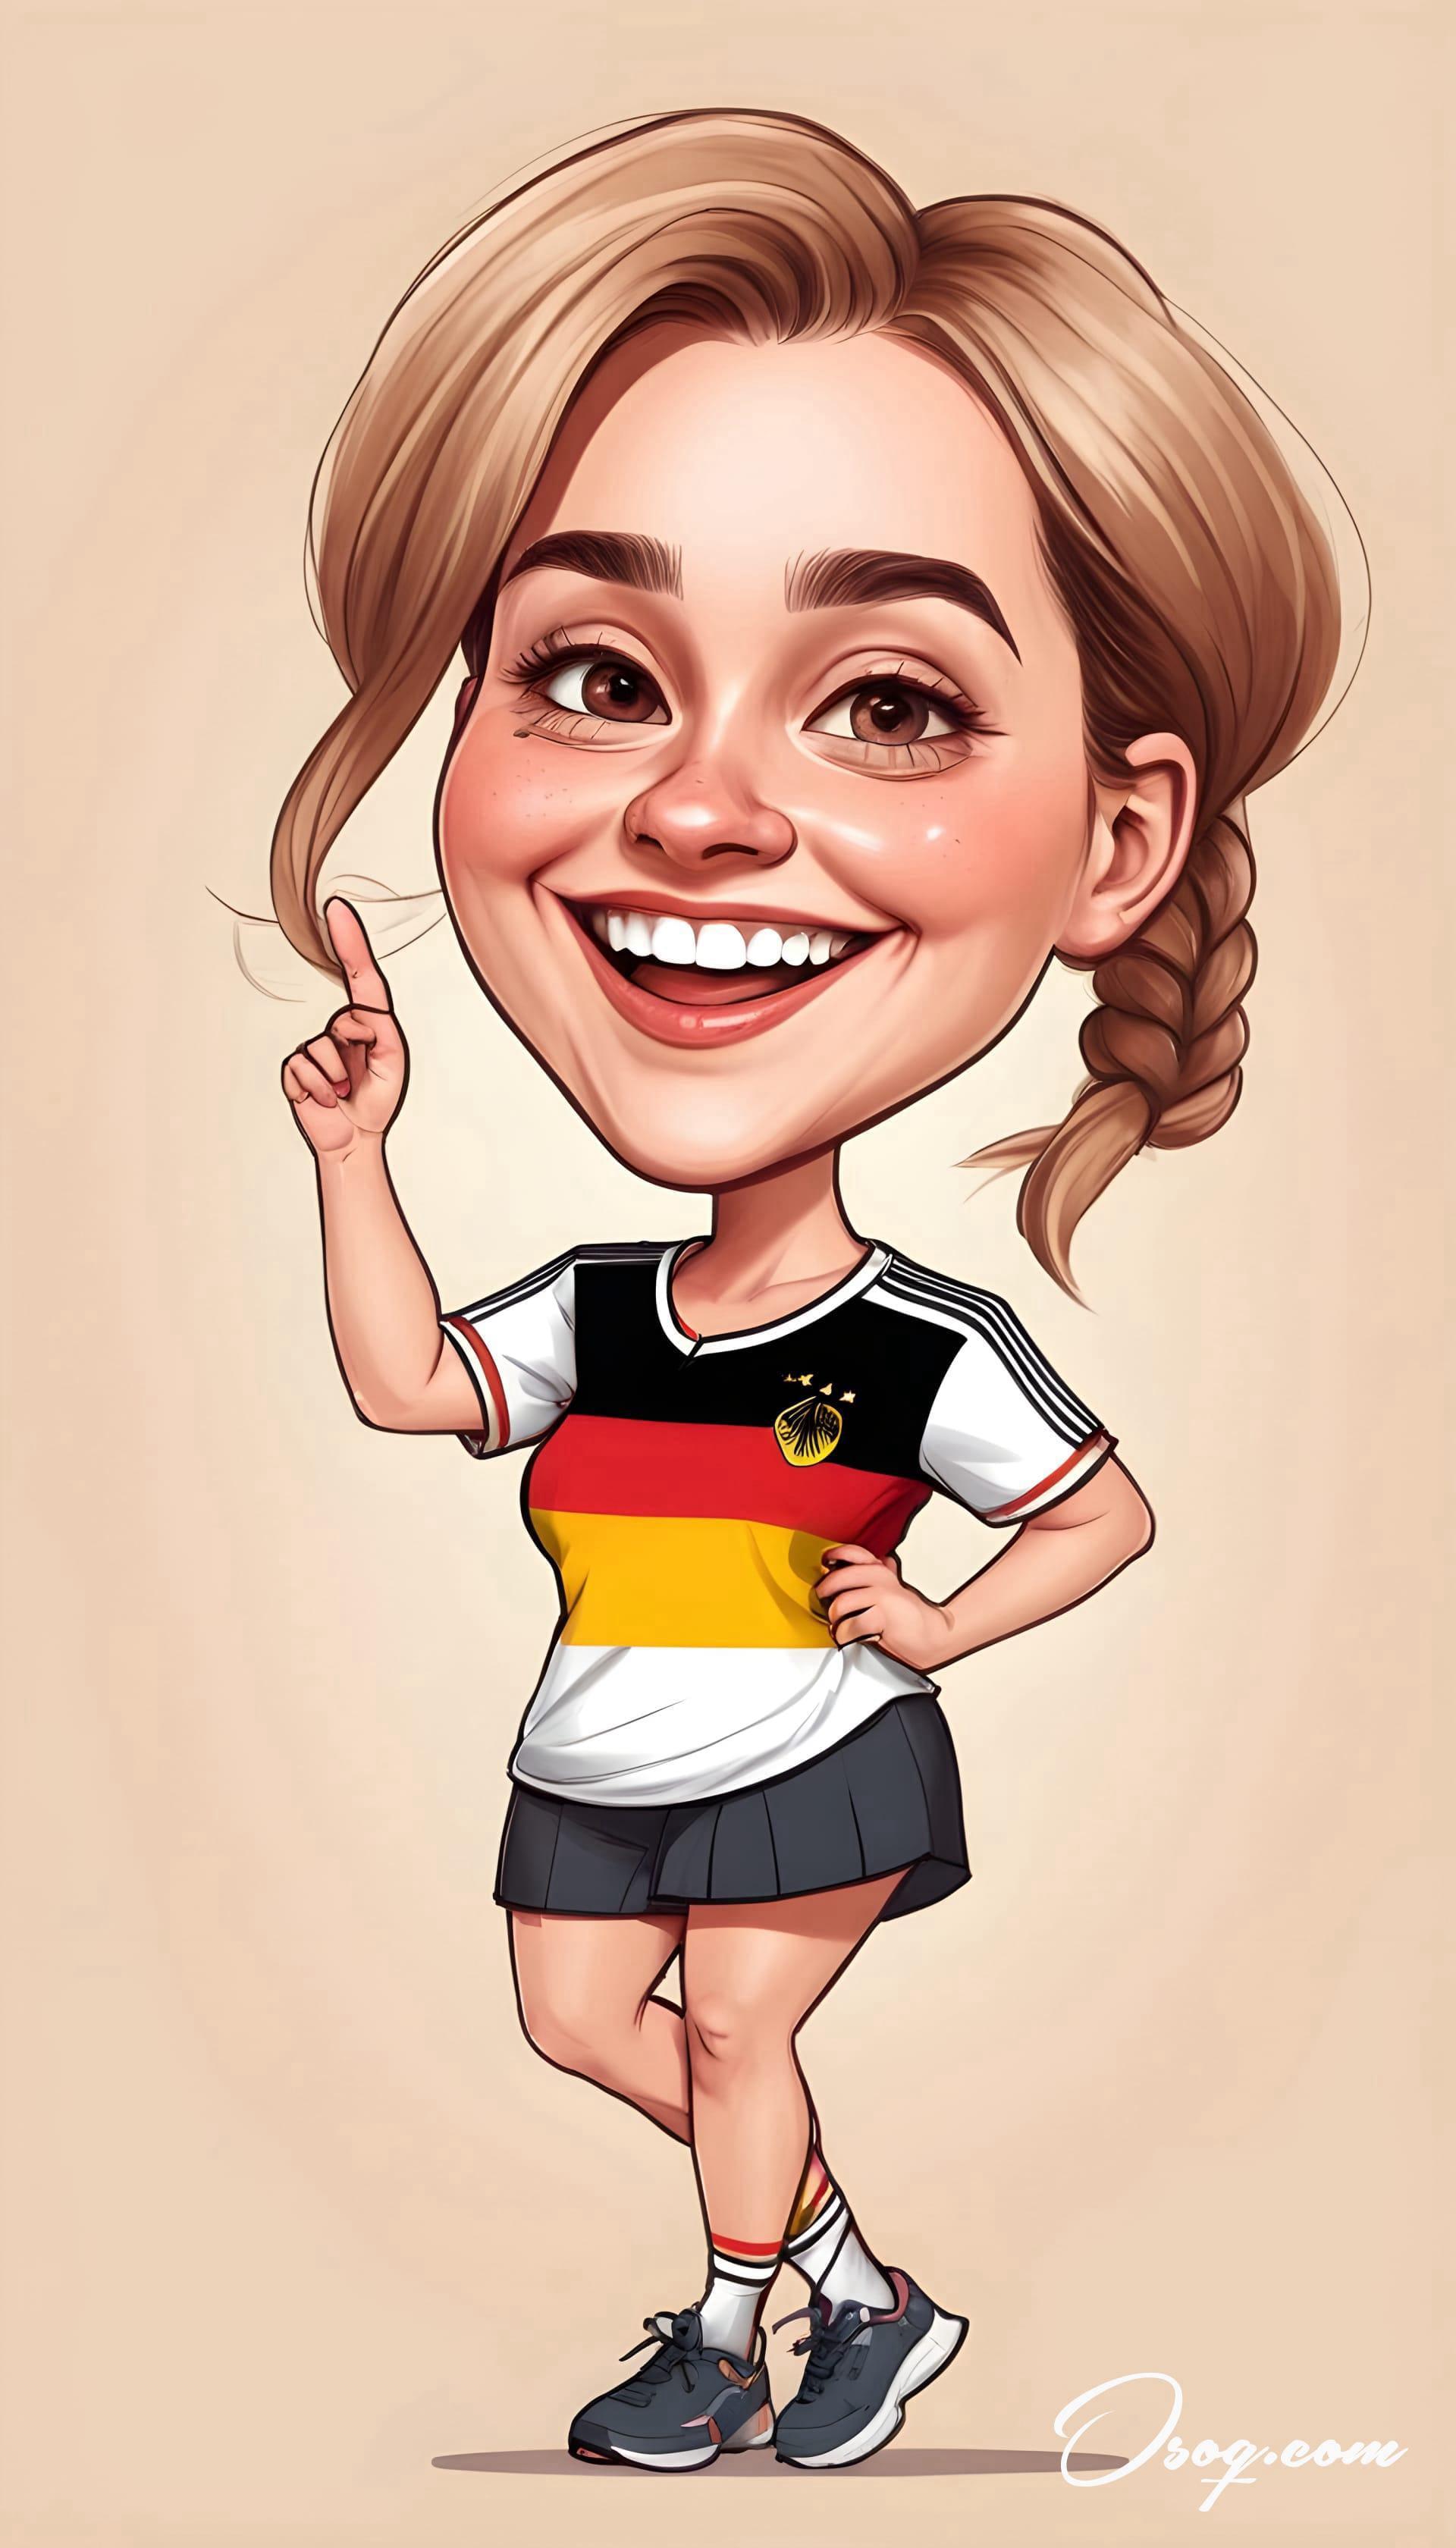 Germany caricature 01